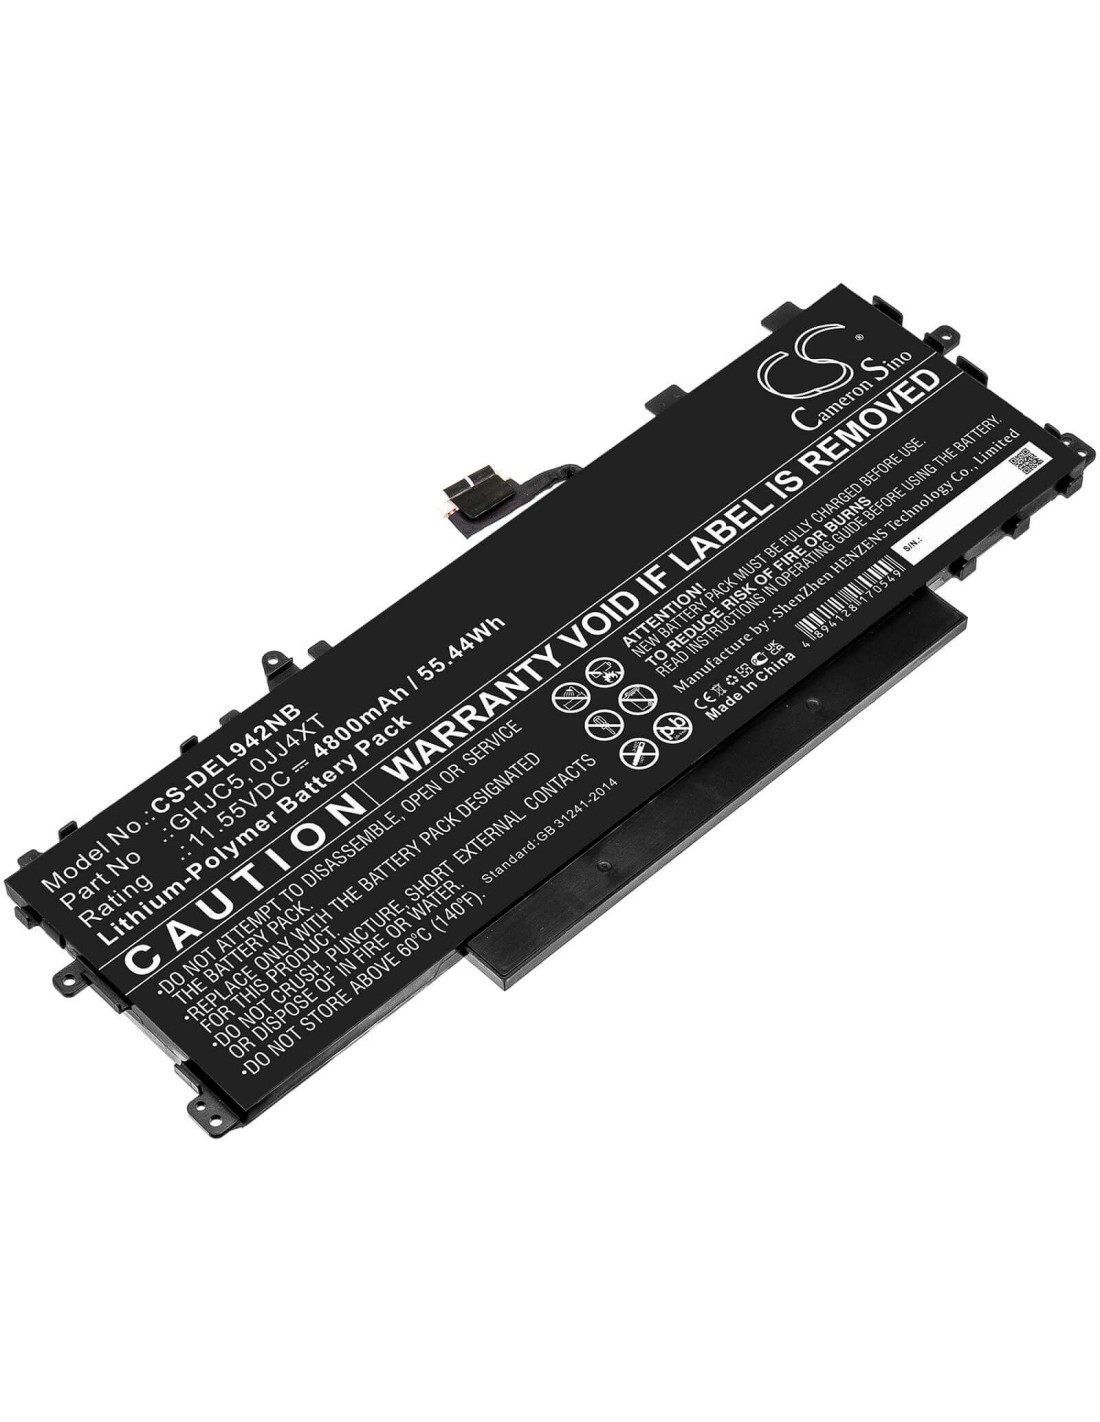 11.55V, Li-Polymer, 4800mAh, Battery fits Dell, Latitude 9420 2-in-1, 55.44Wh